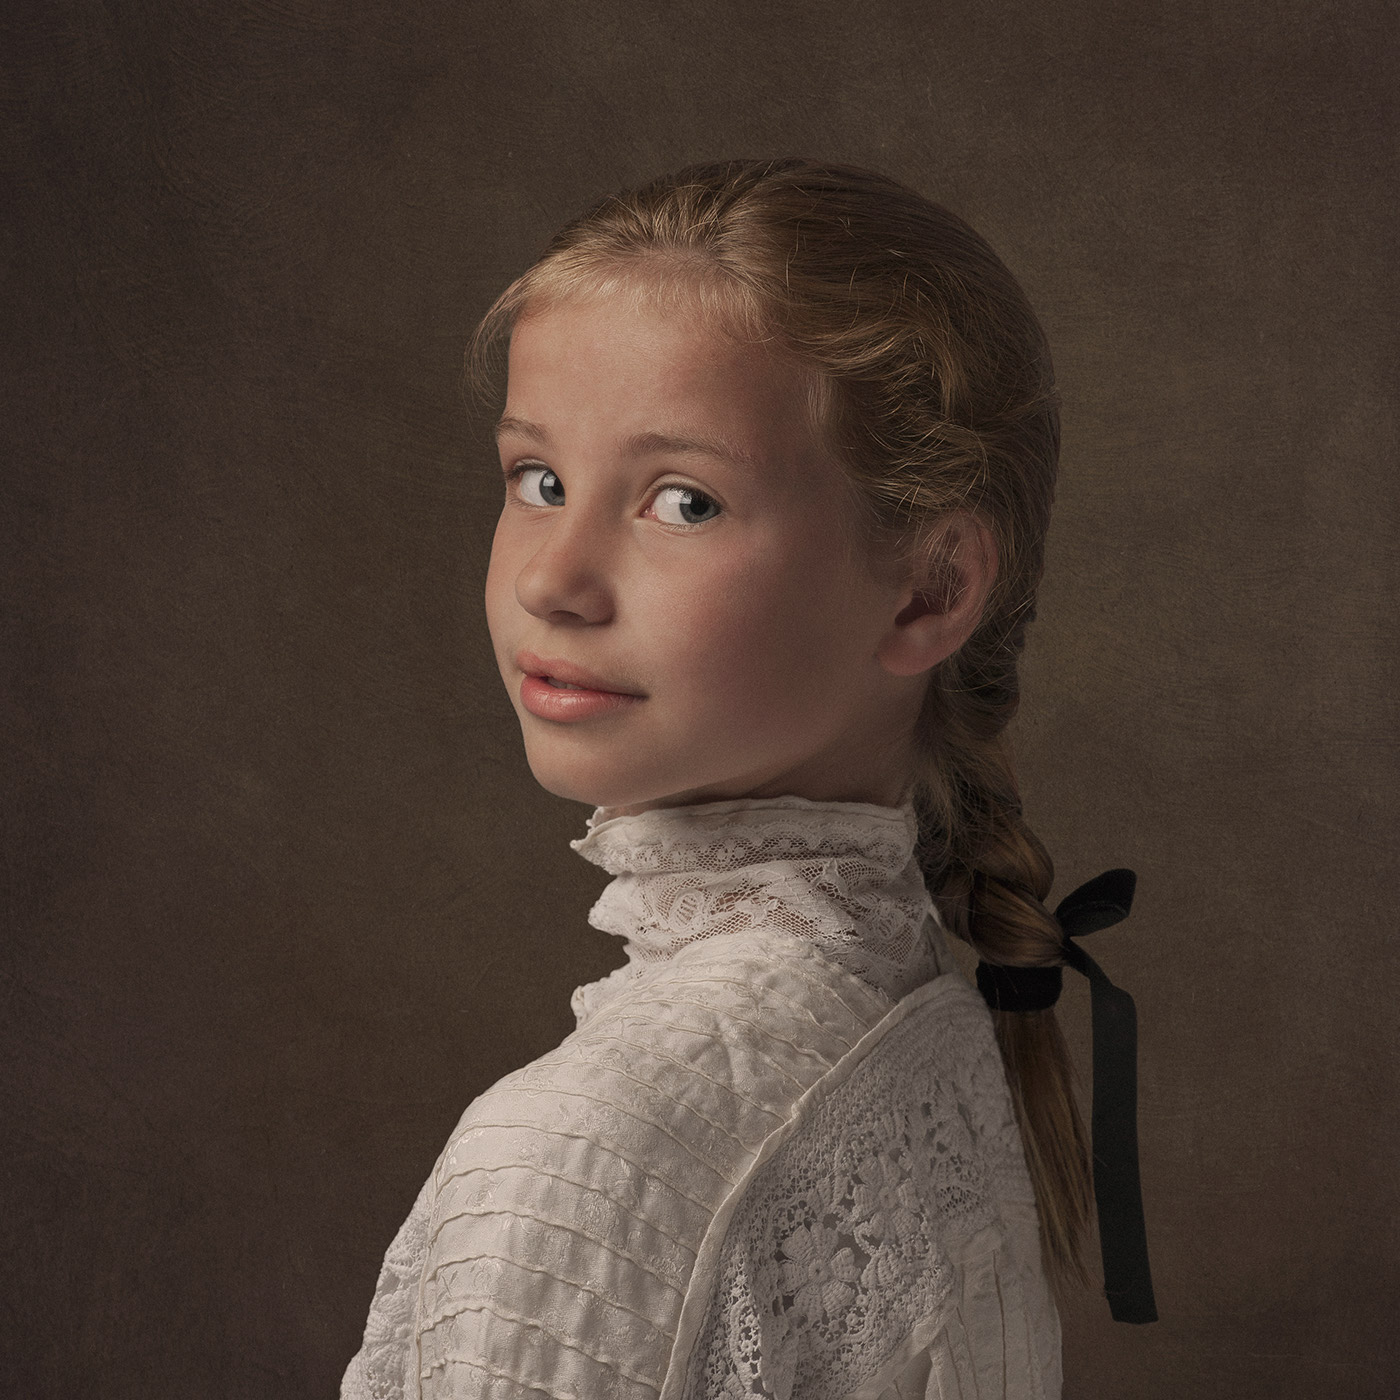 portrait photography fine art photography lace collars old dutch masters